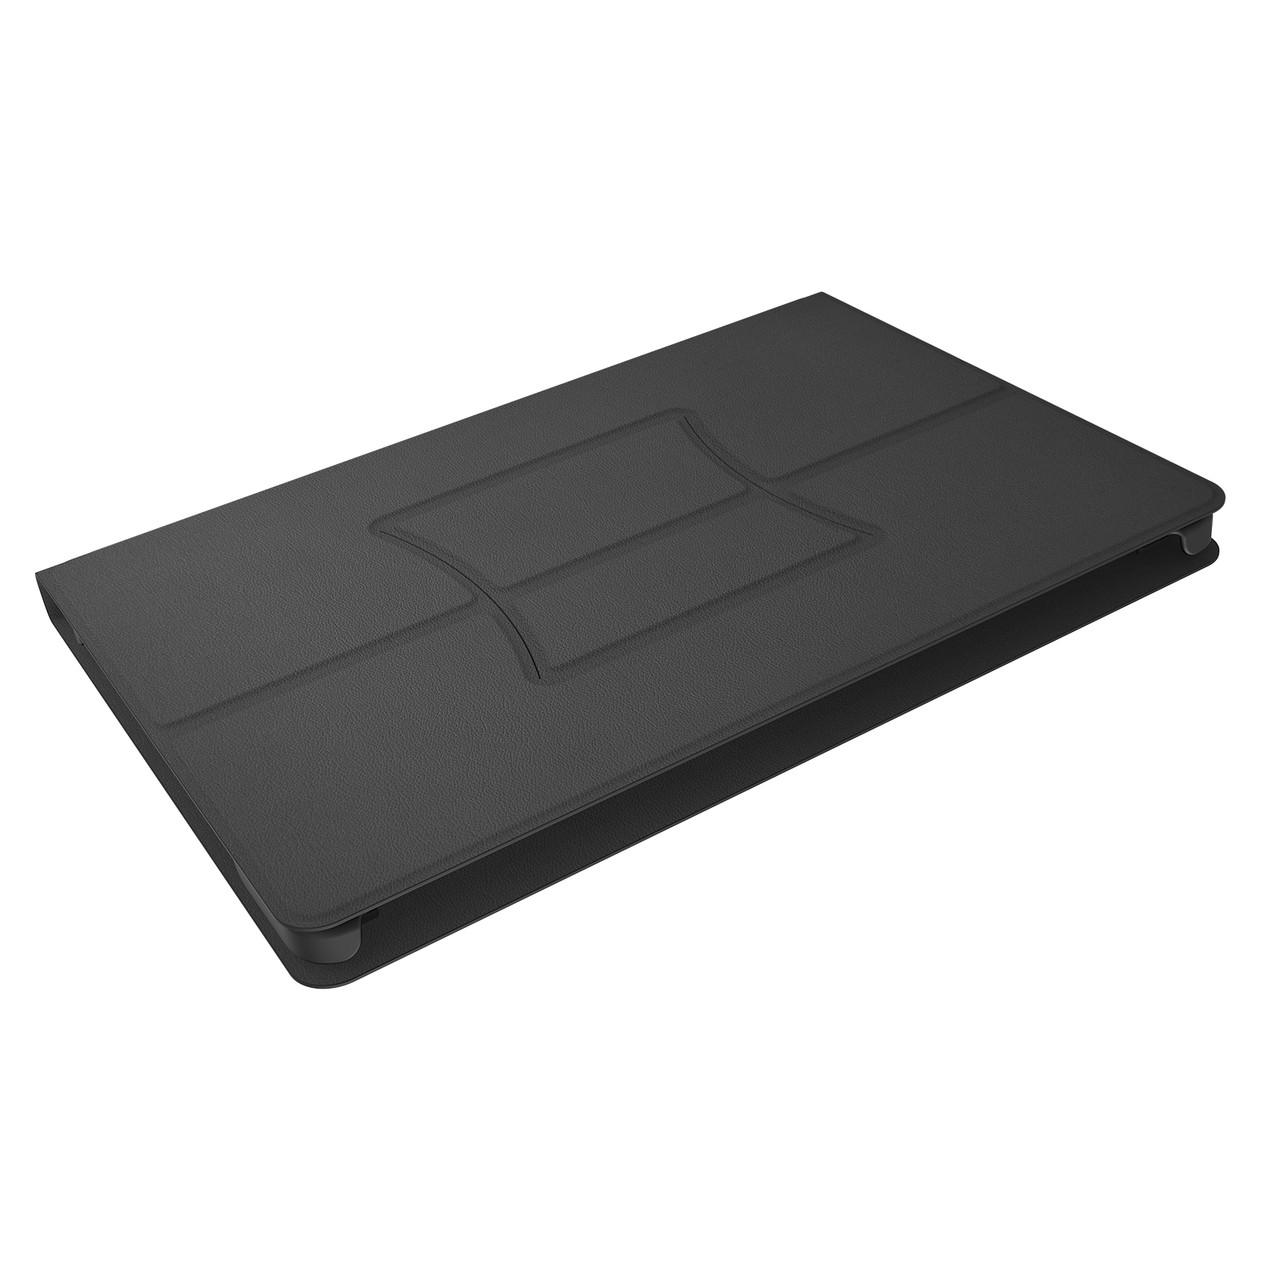 DOOGEE Magnetic Suction Keyboard & Tablet Case For T20